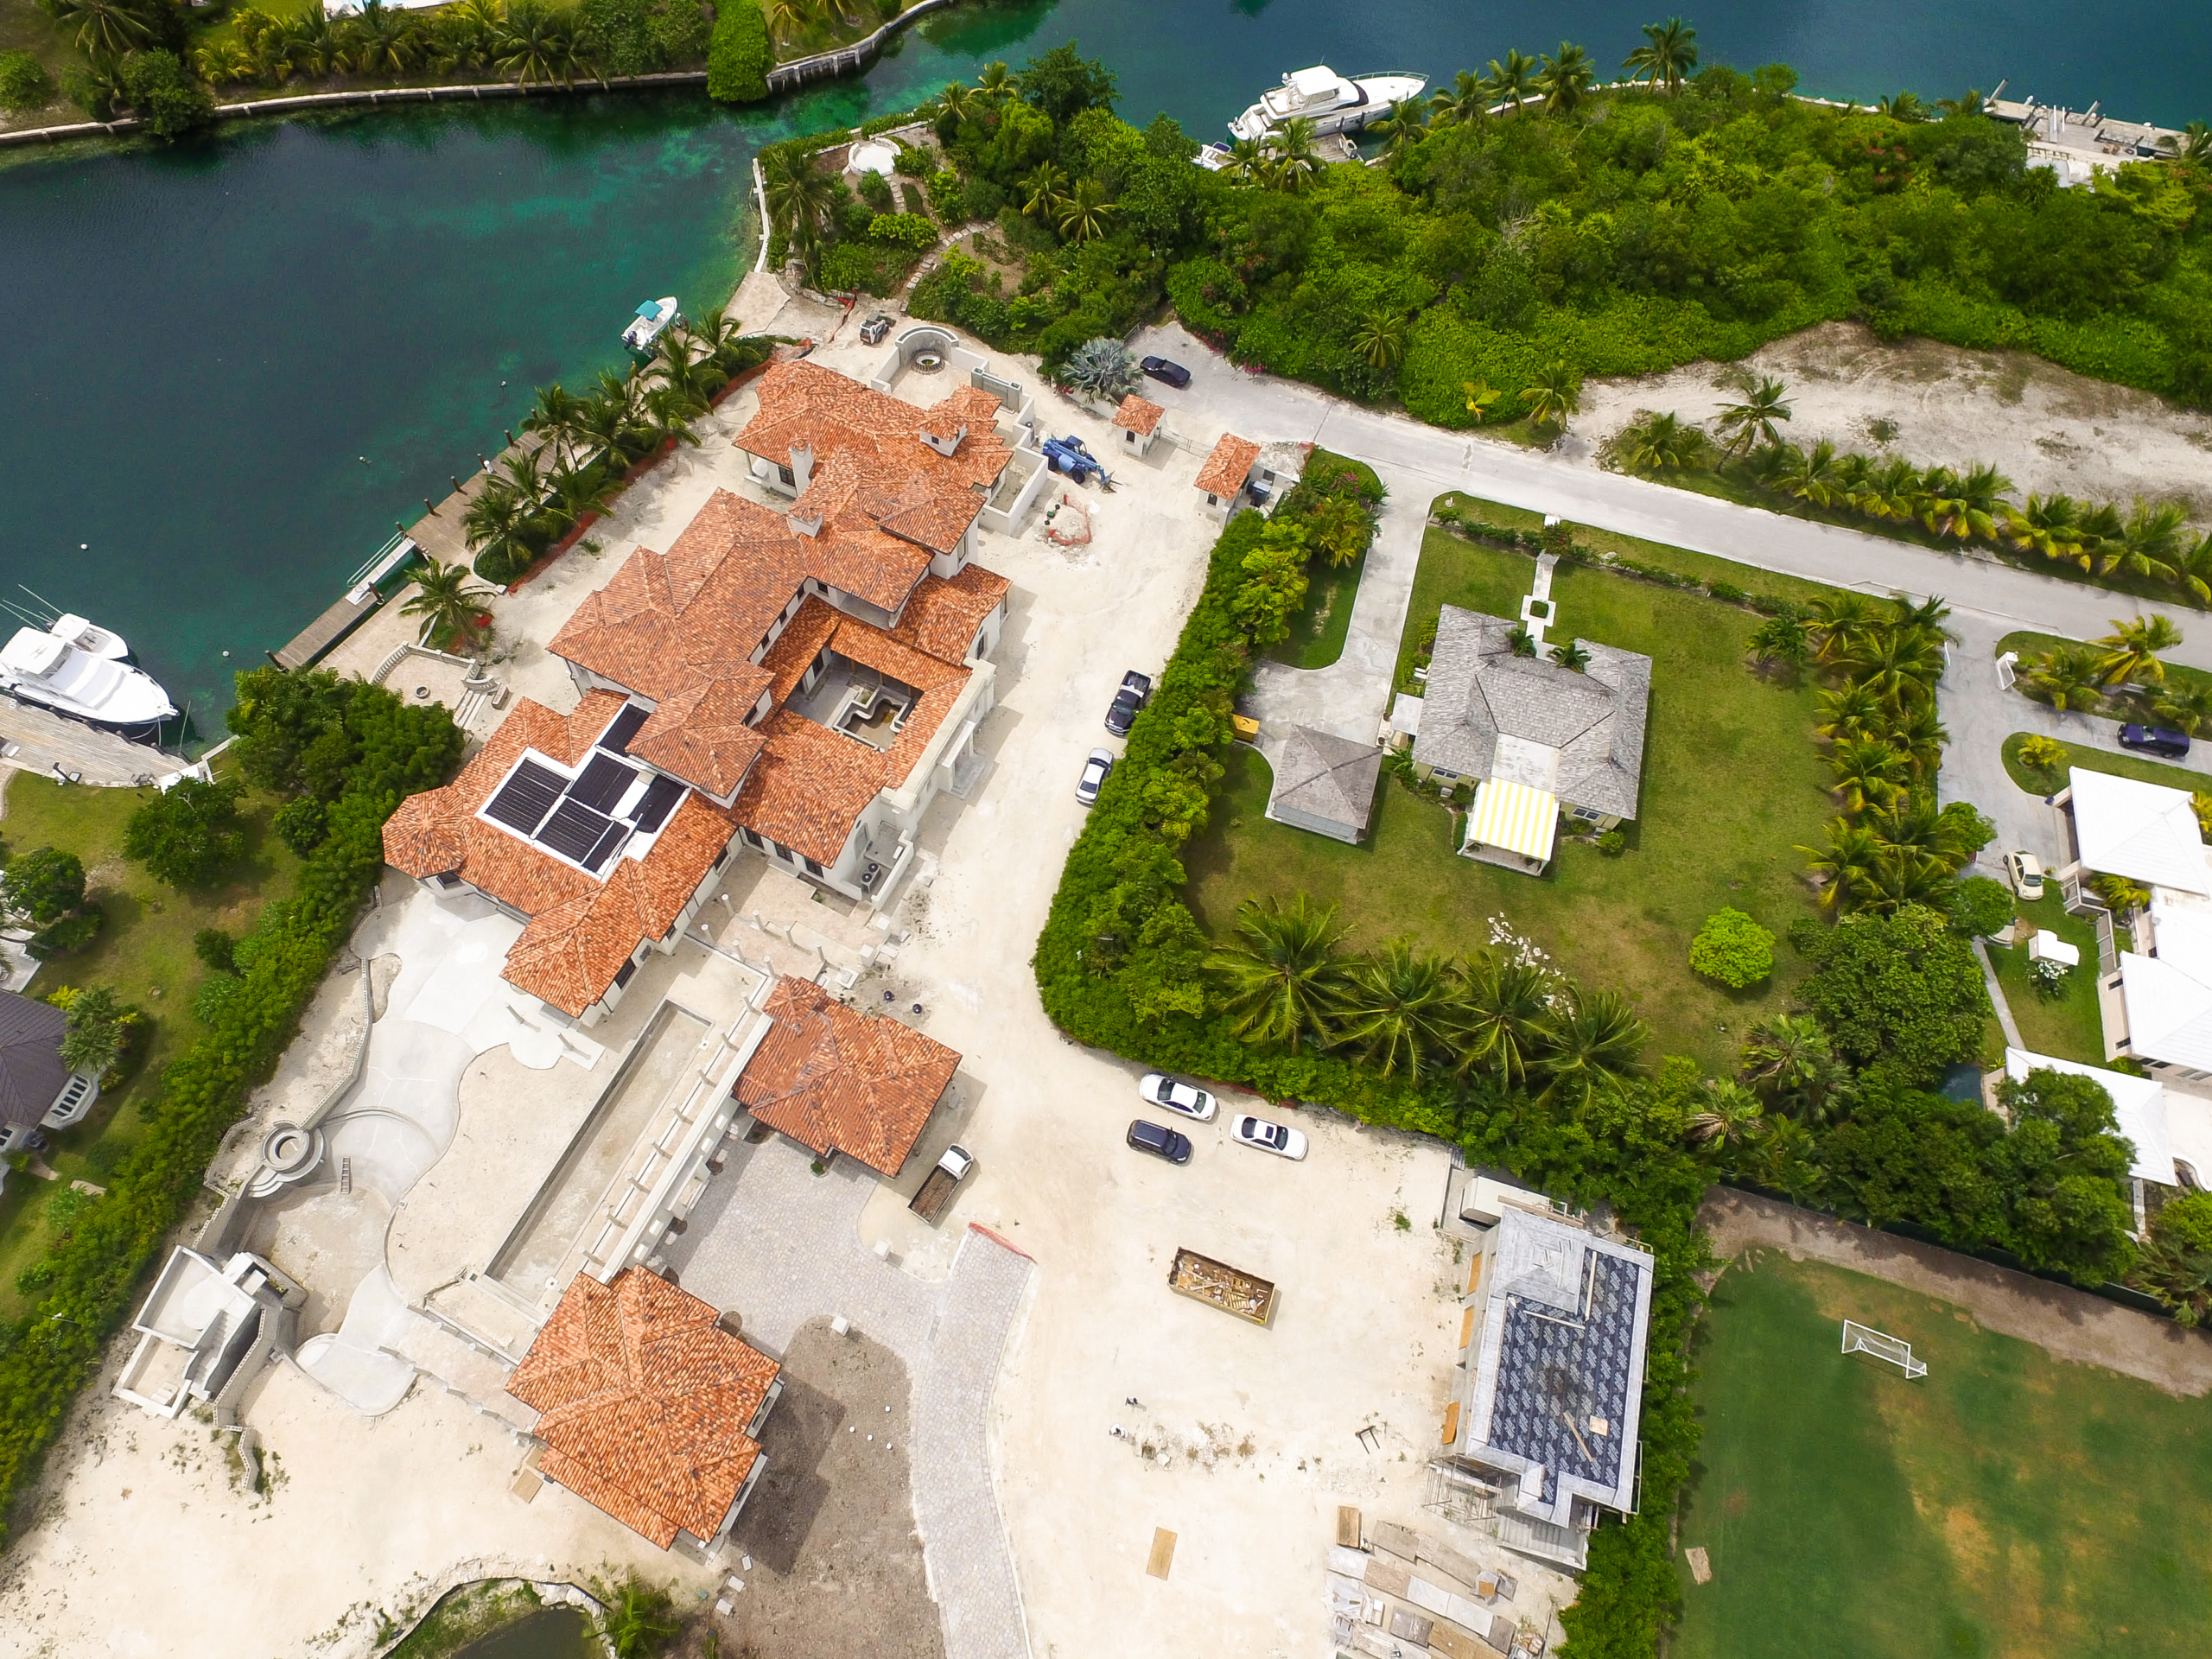 An aerial view of a house near the water.